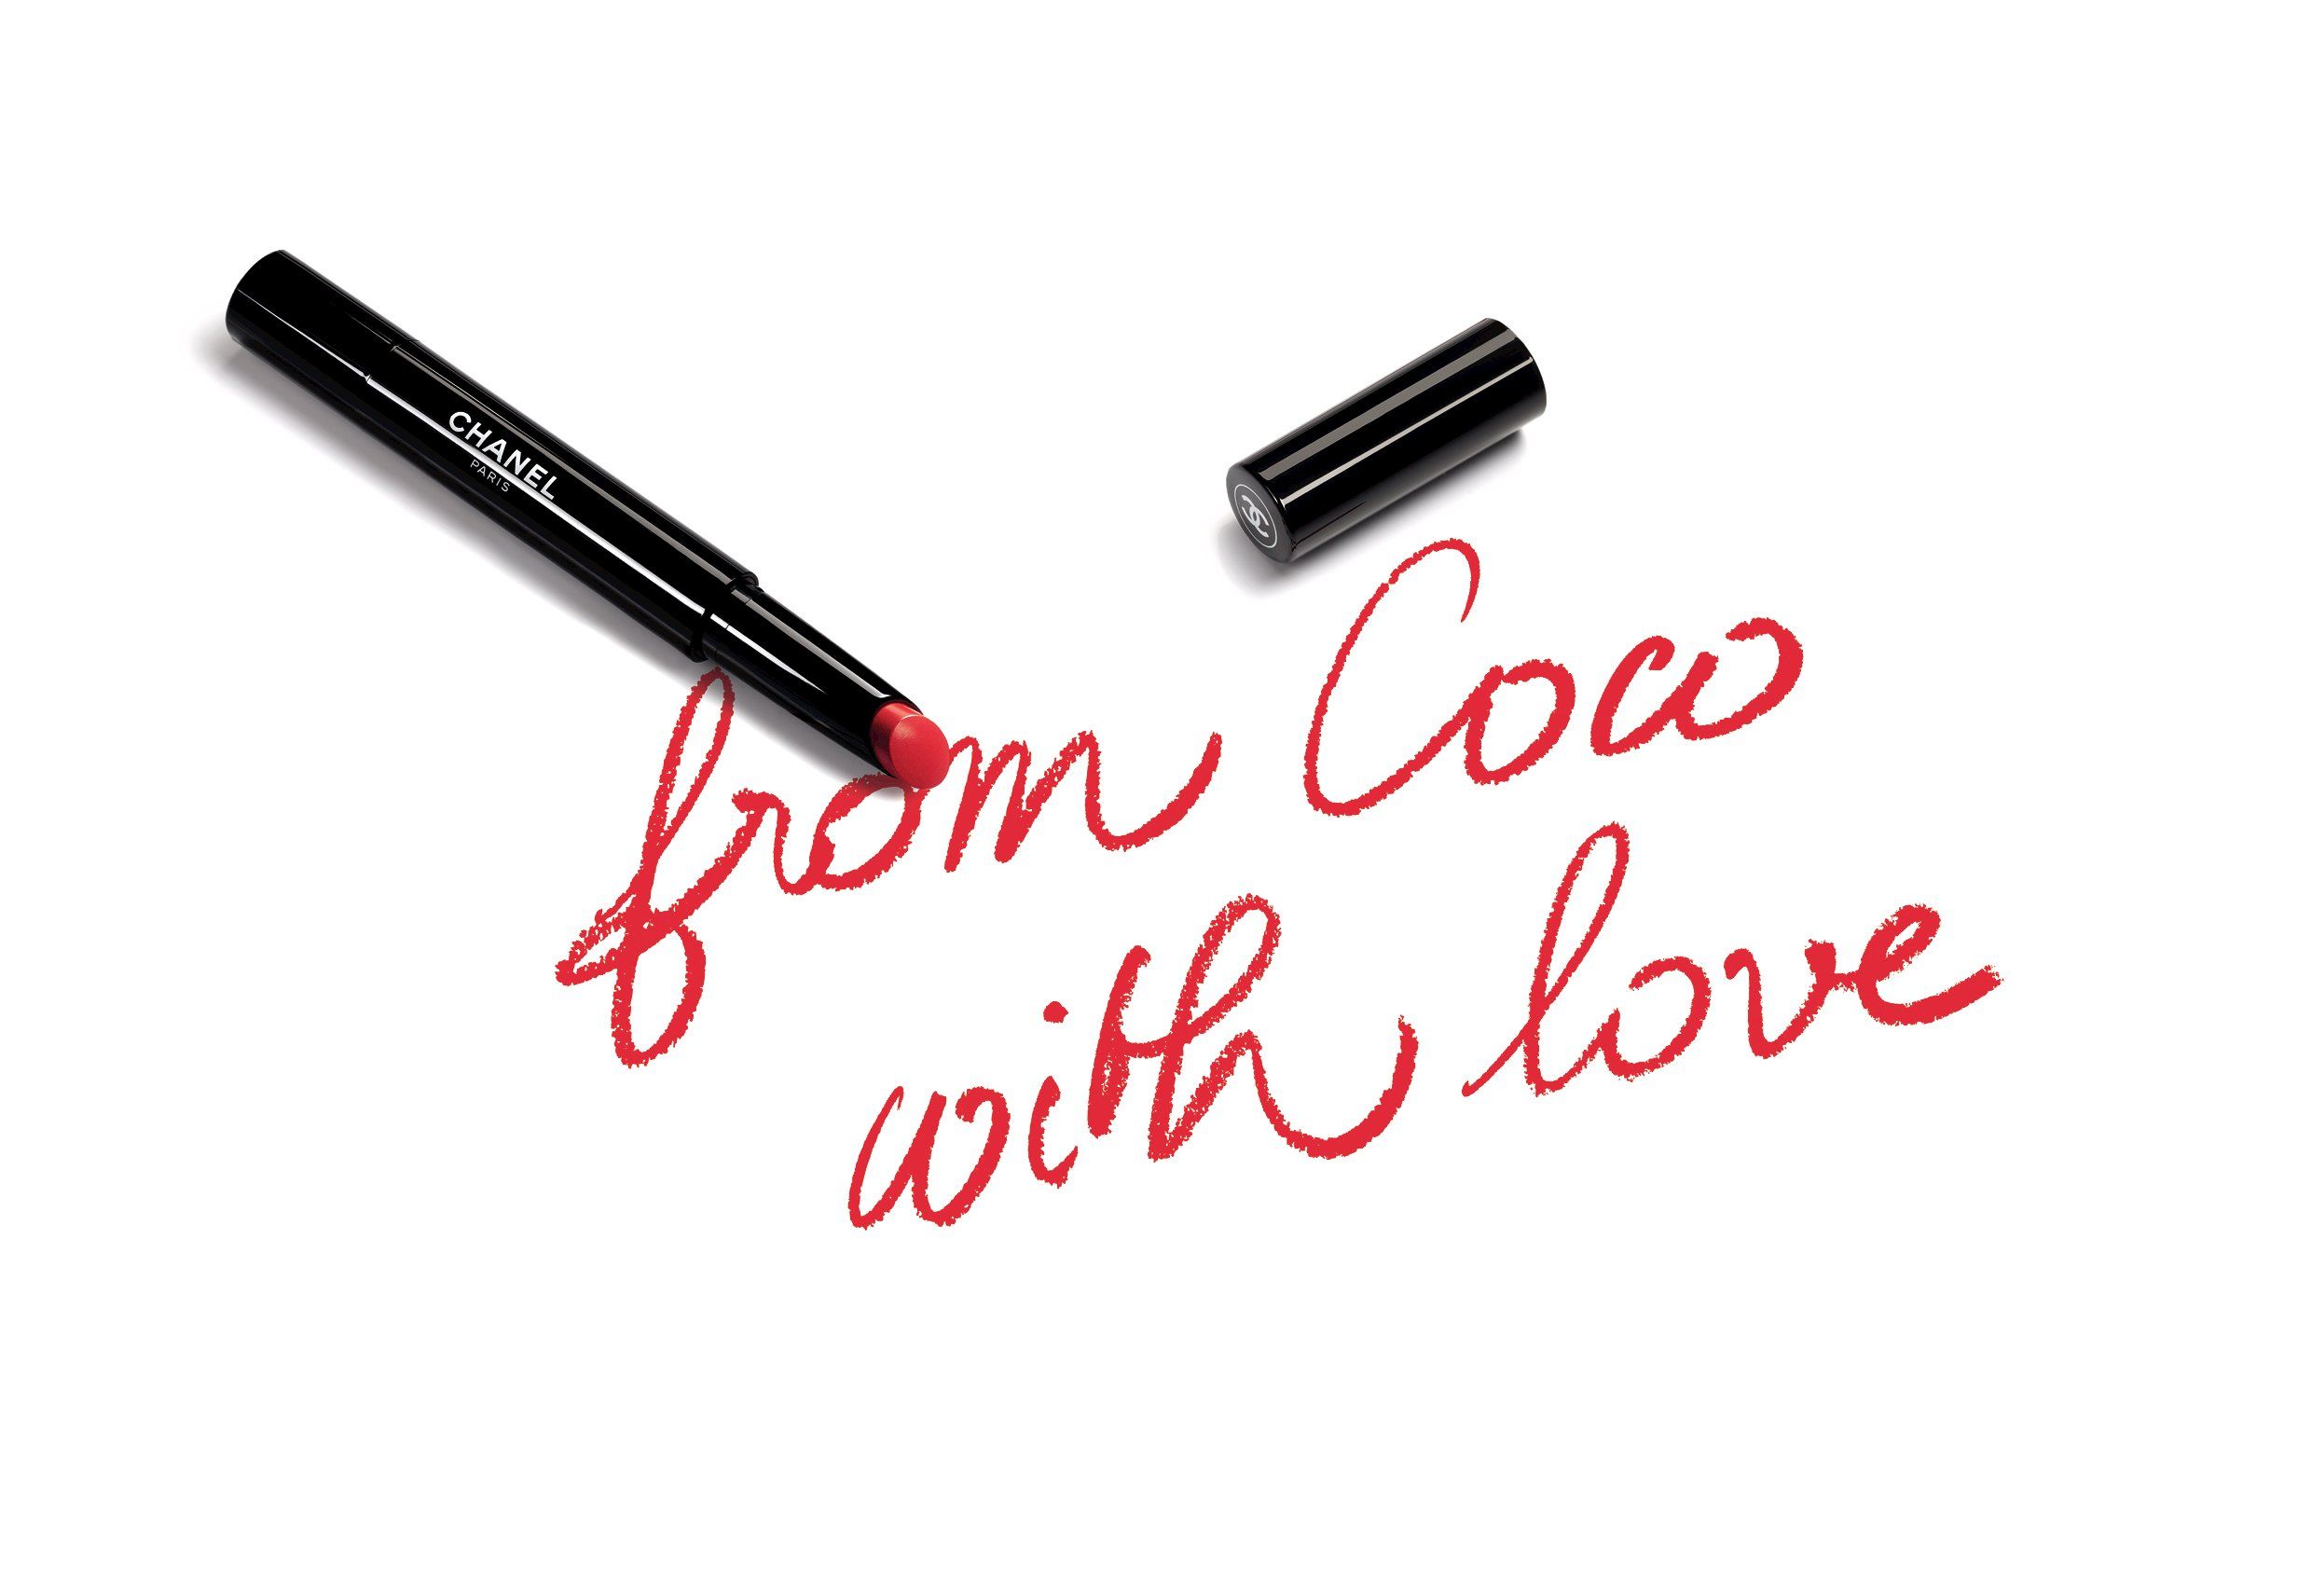 Chanel Conte (202) Rouge Coco Stylo Review & Swatches